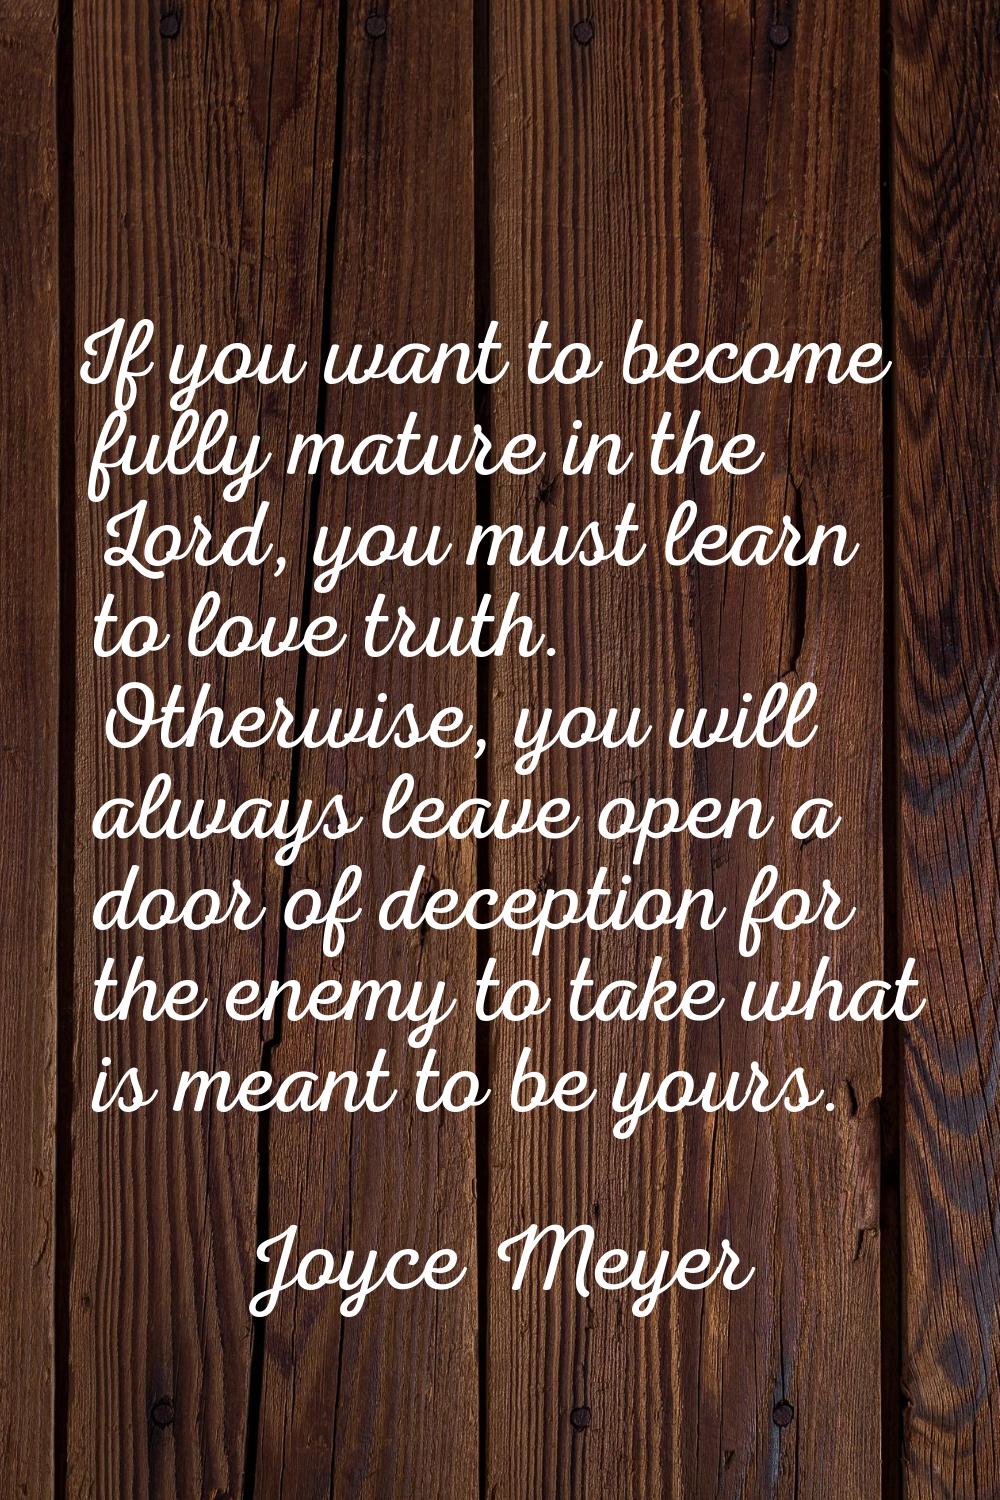 If you want to become fully mature in the Lord, you must learn to love truth. Otherwise, you will a